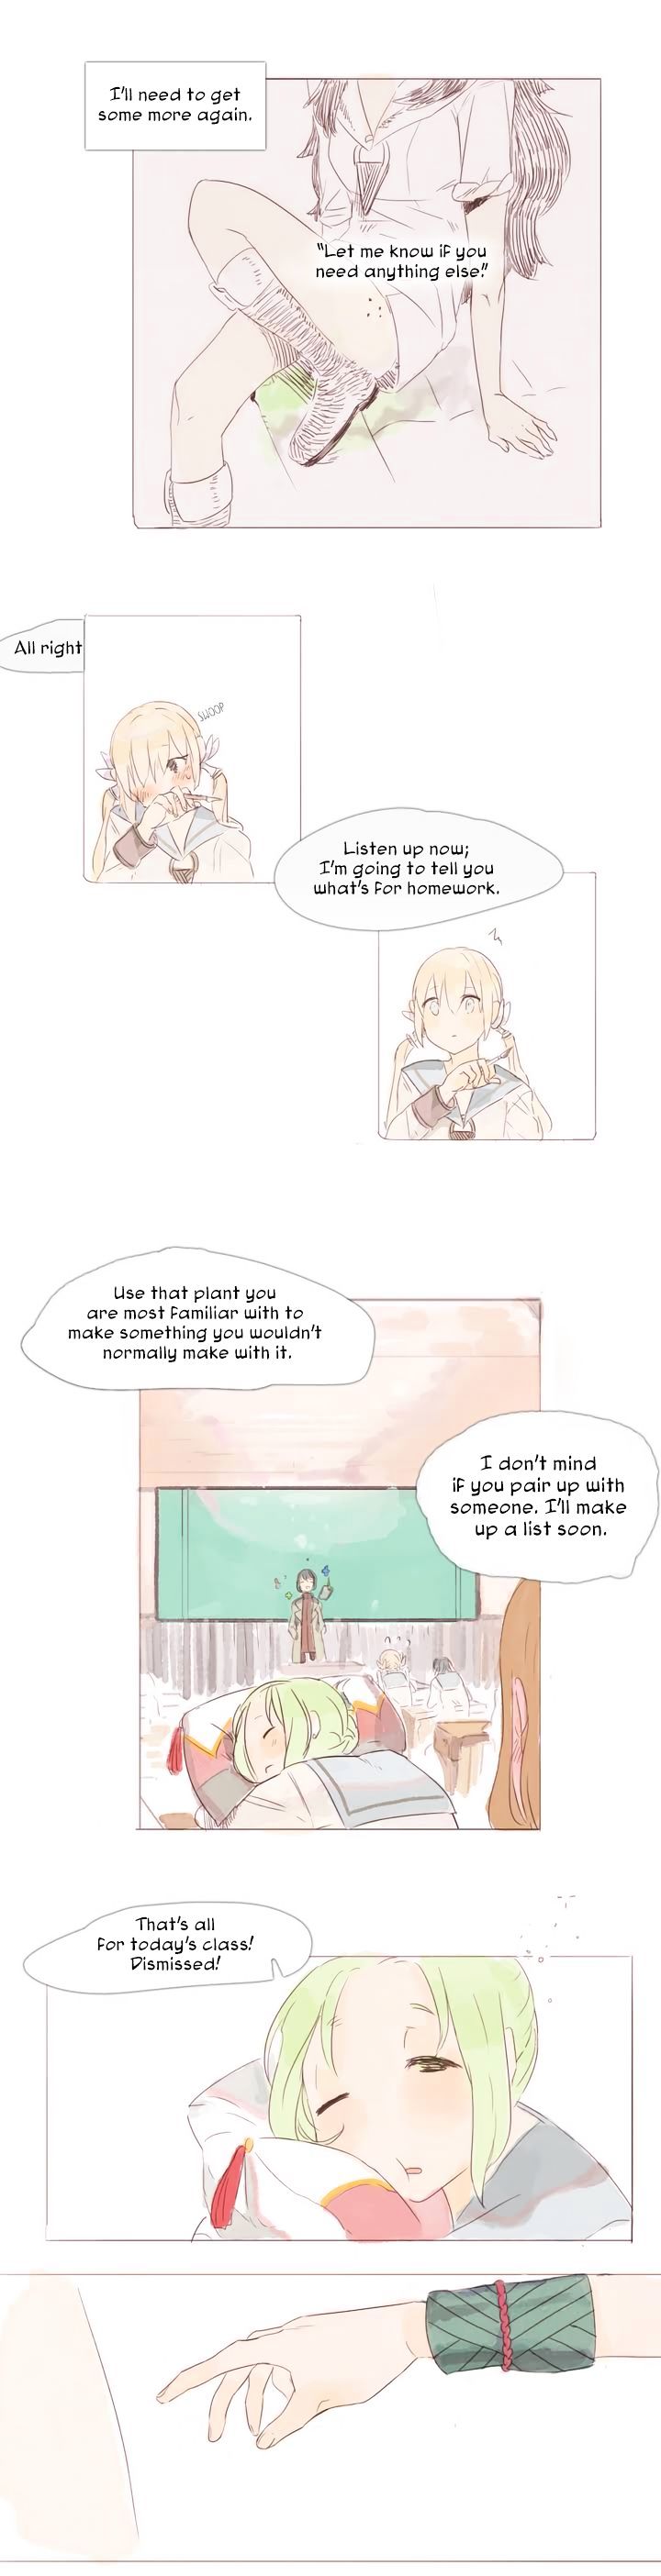 Hide In The Flowers - Page 4